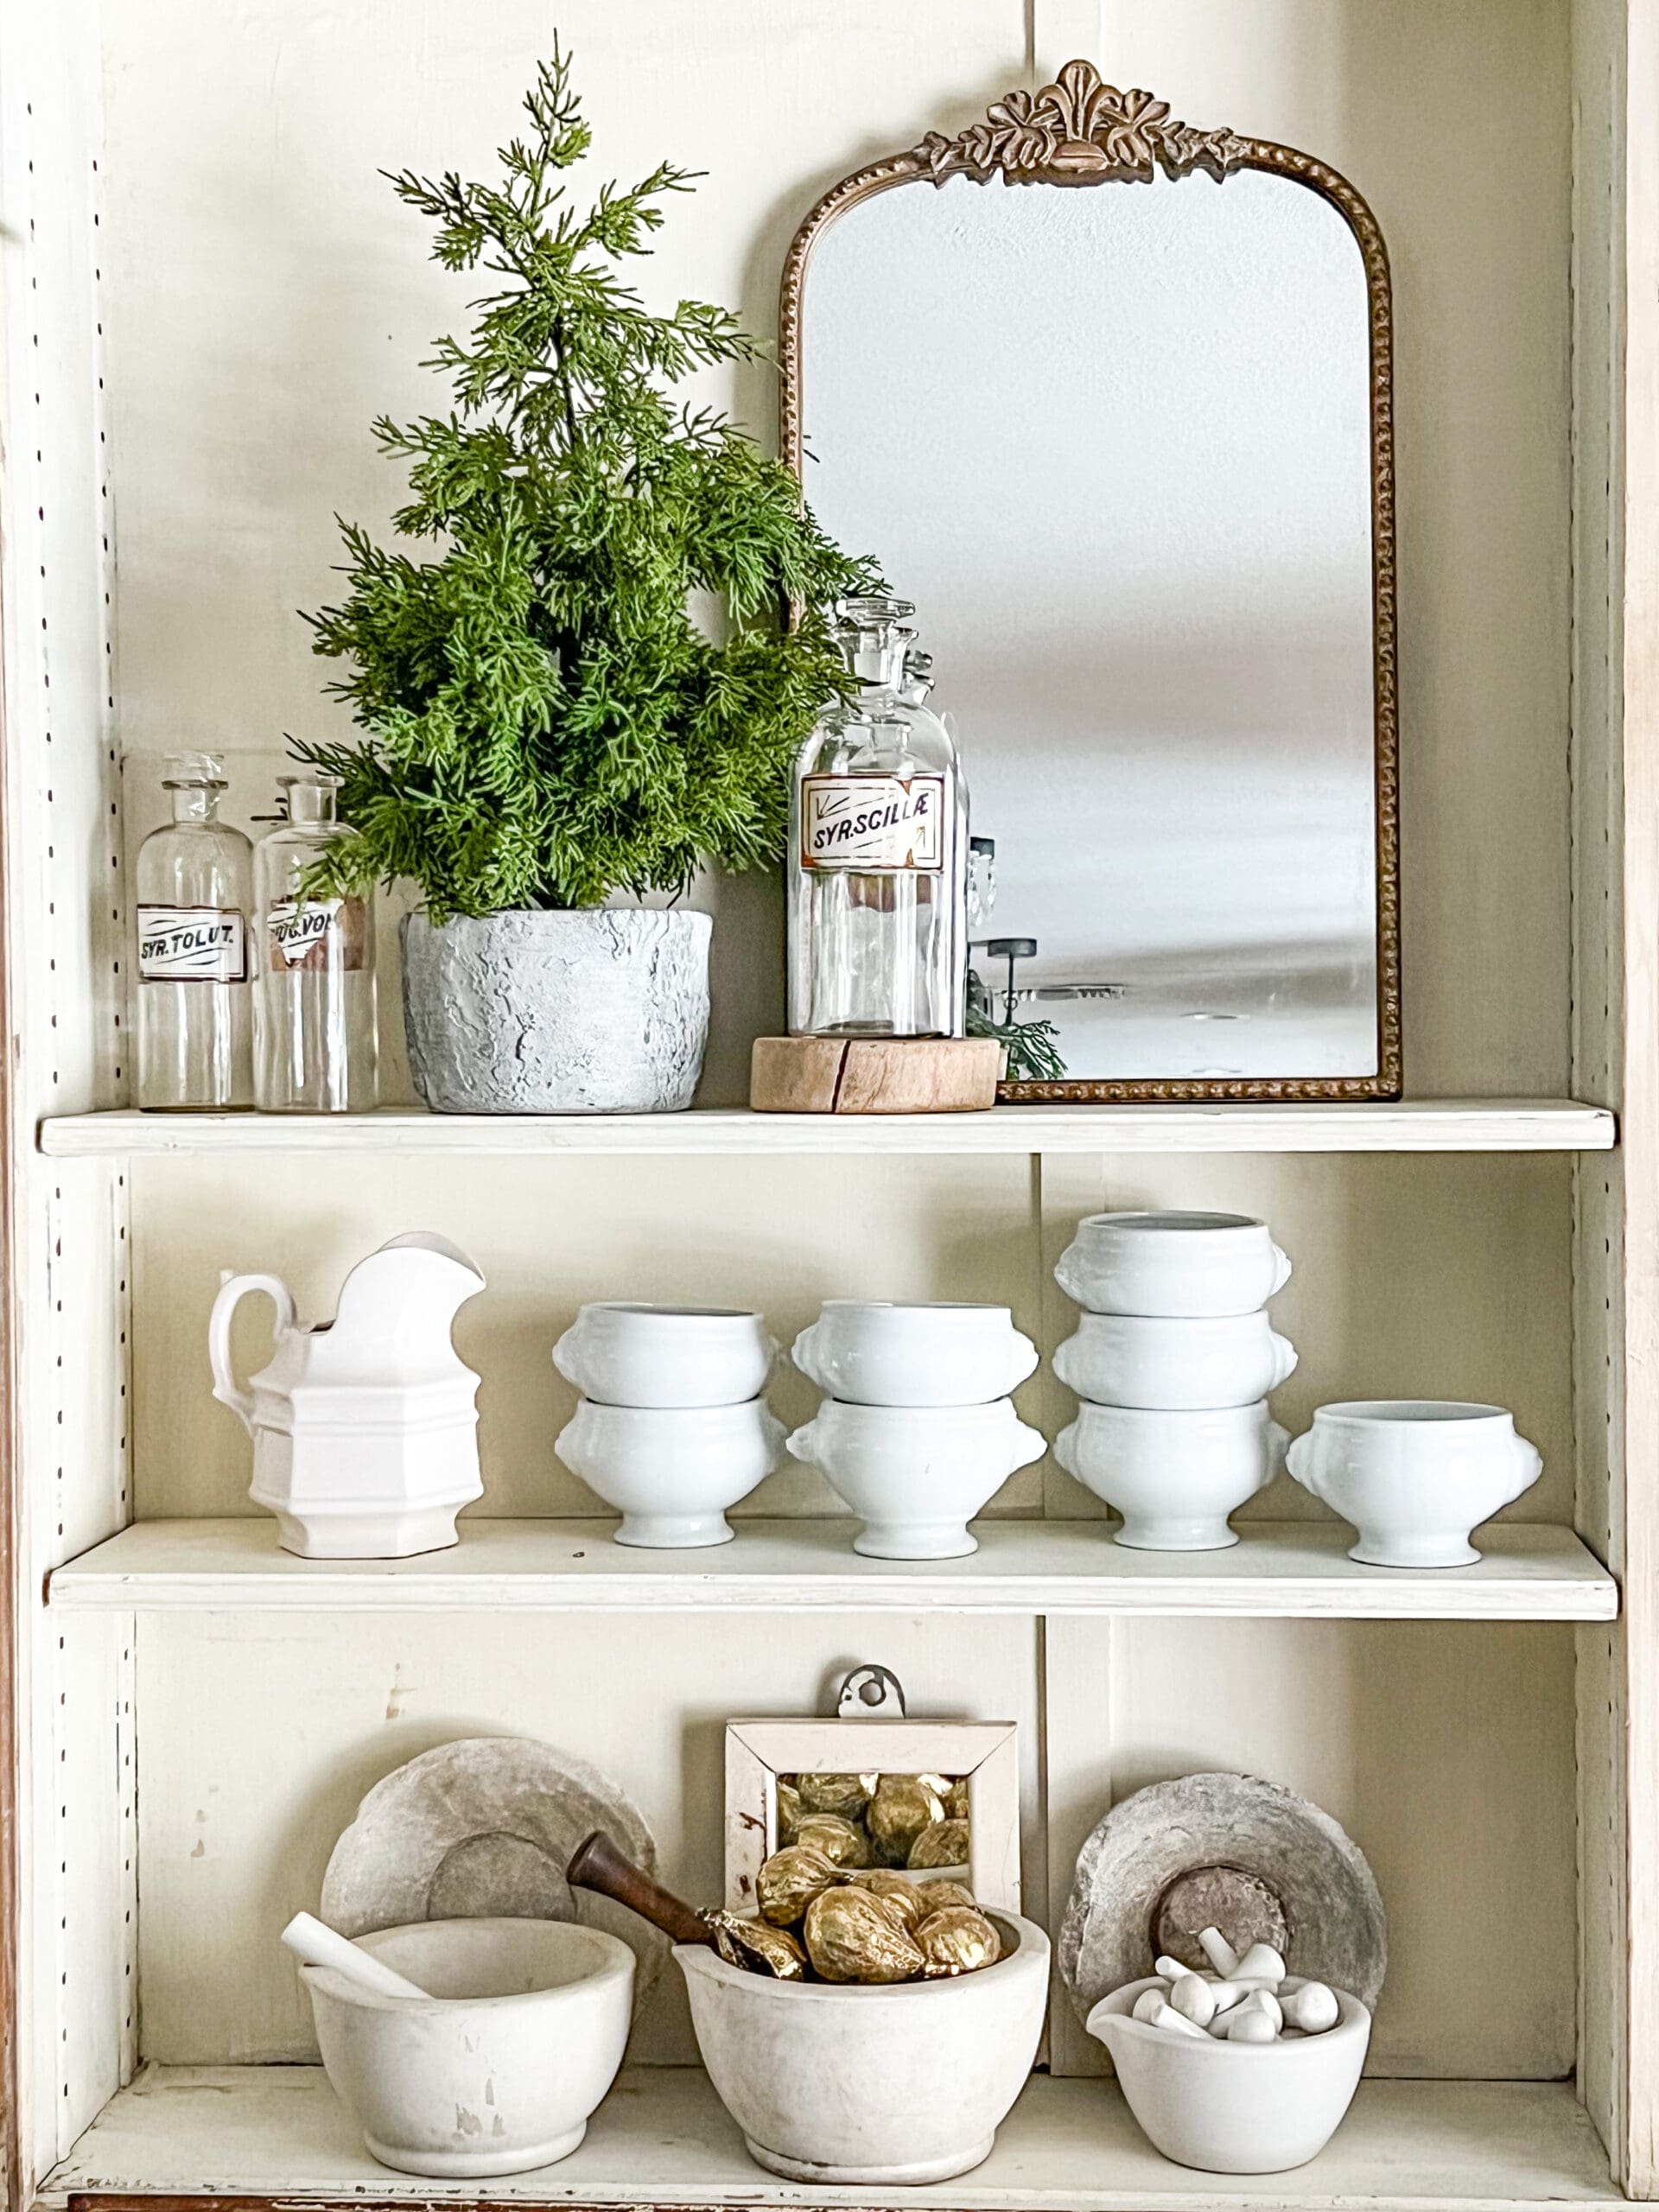 shelving styled with a medium-sized decorative tree, a gold mirror, several mortar and pestles with decorative accents inside, and ironstone